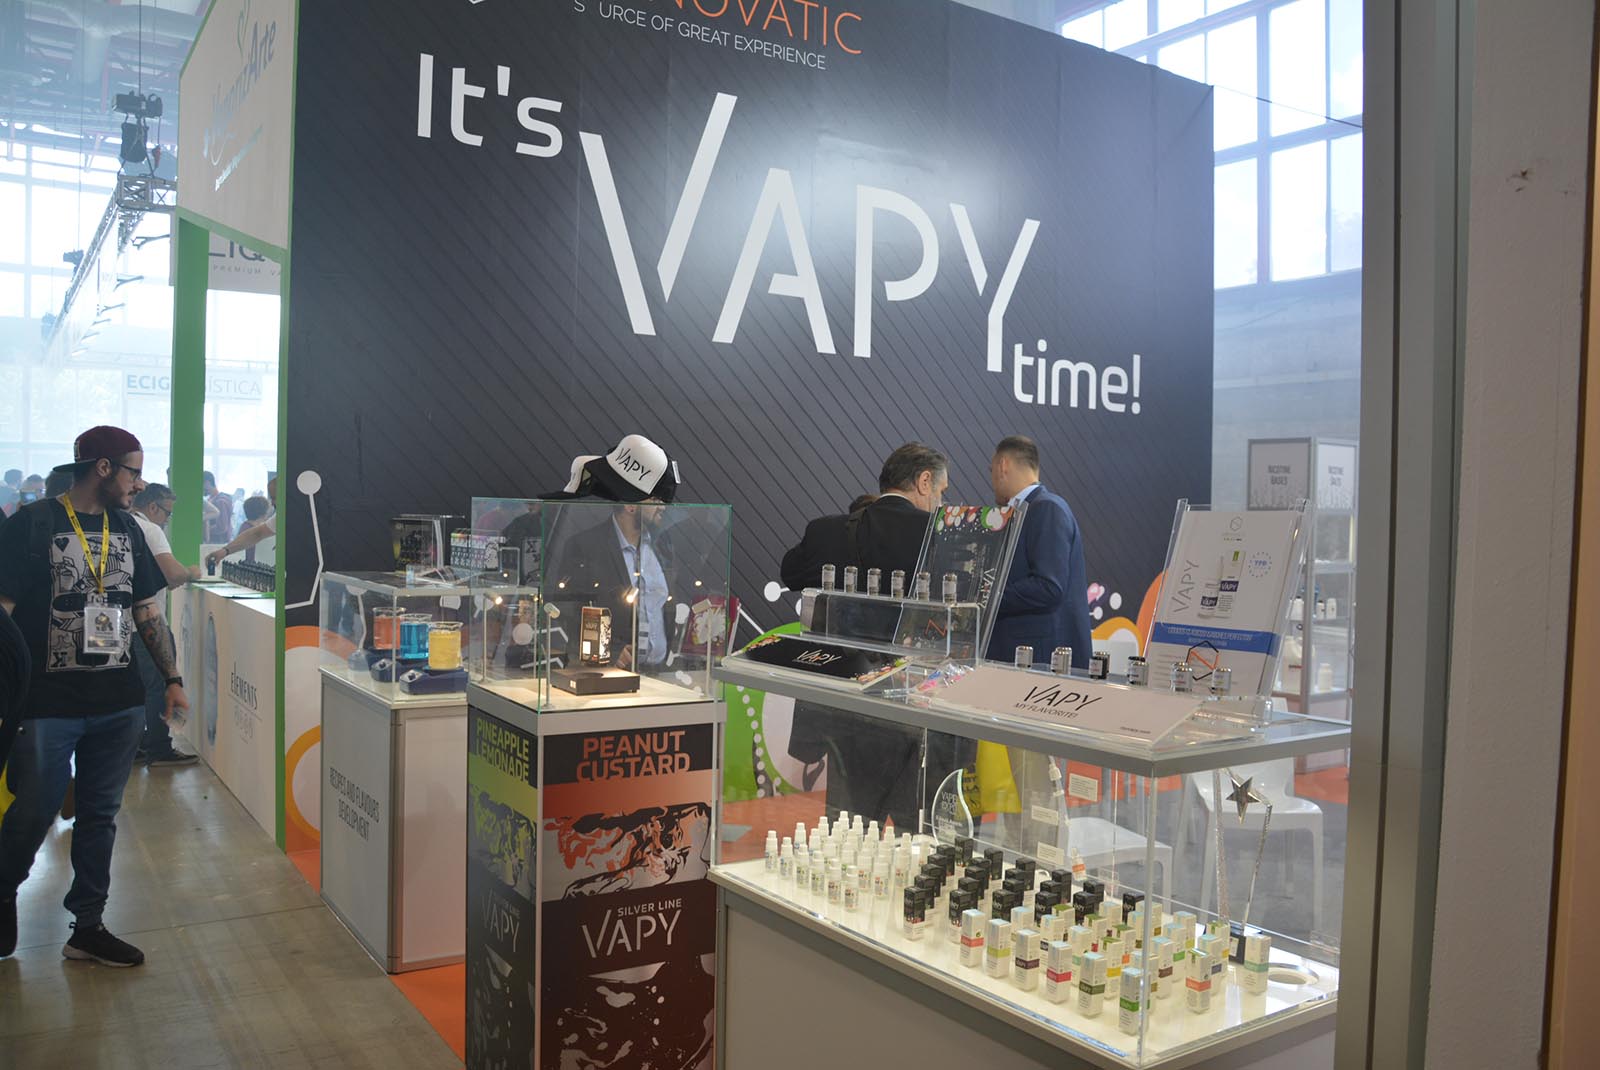 people at chemnovatic stand during vapeexpo 2018 spain